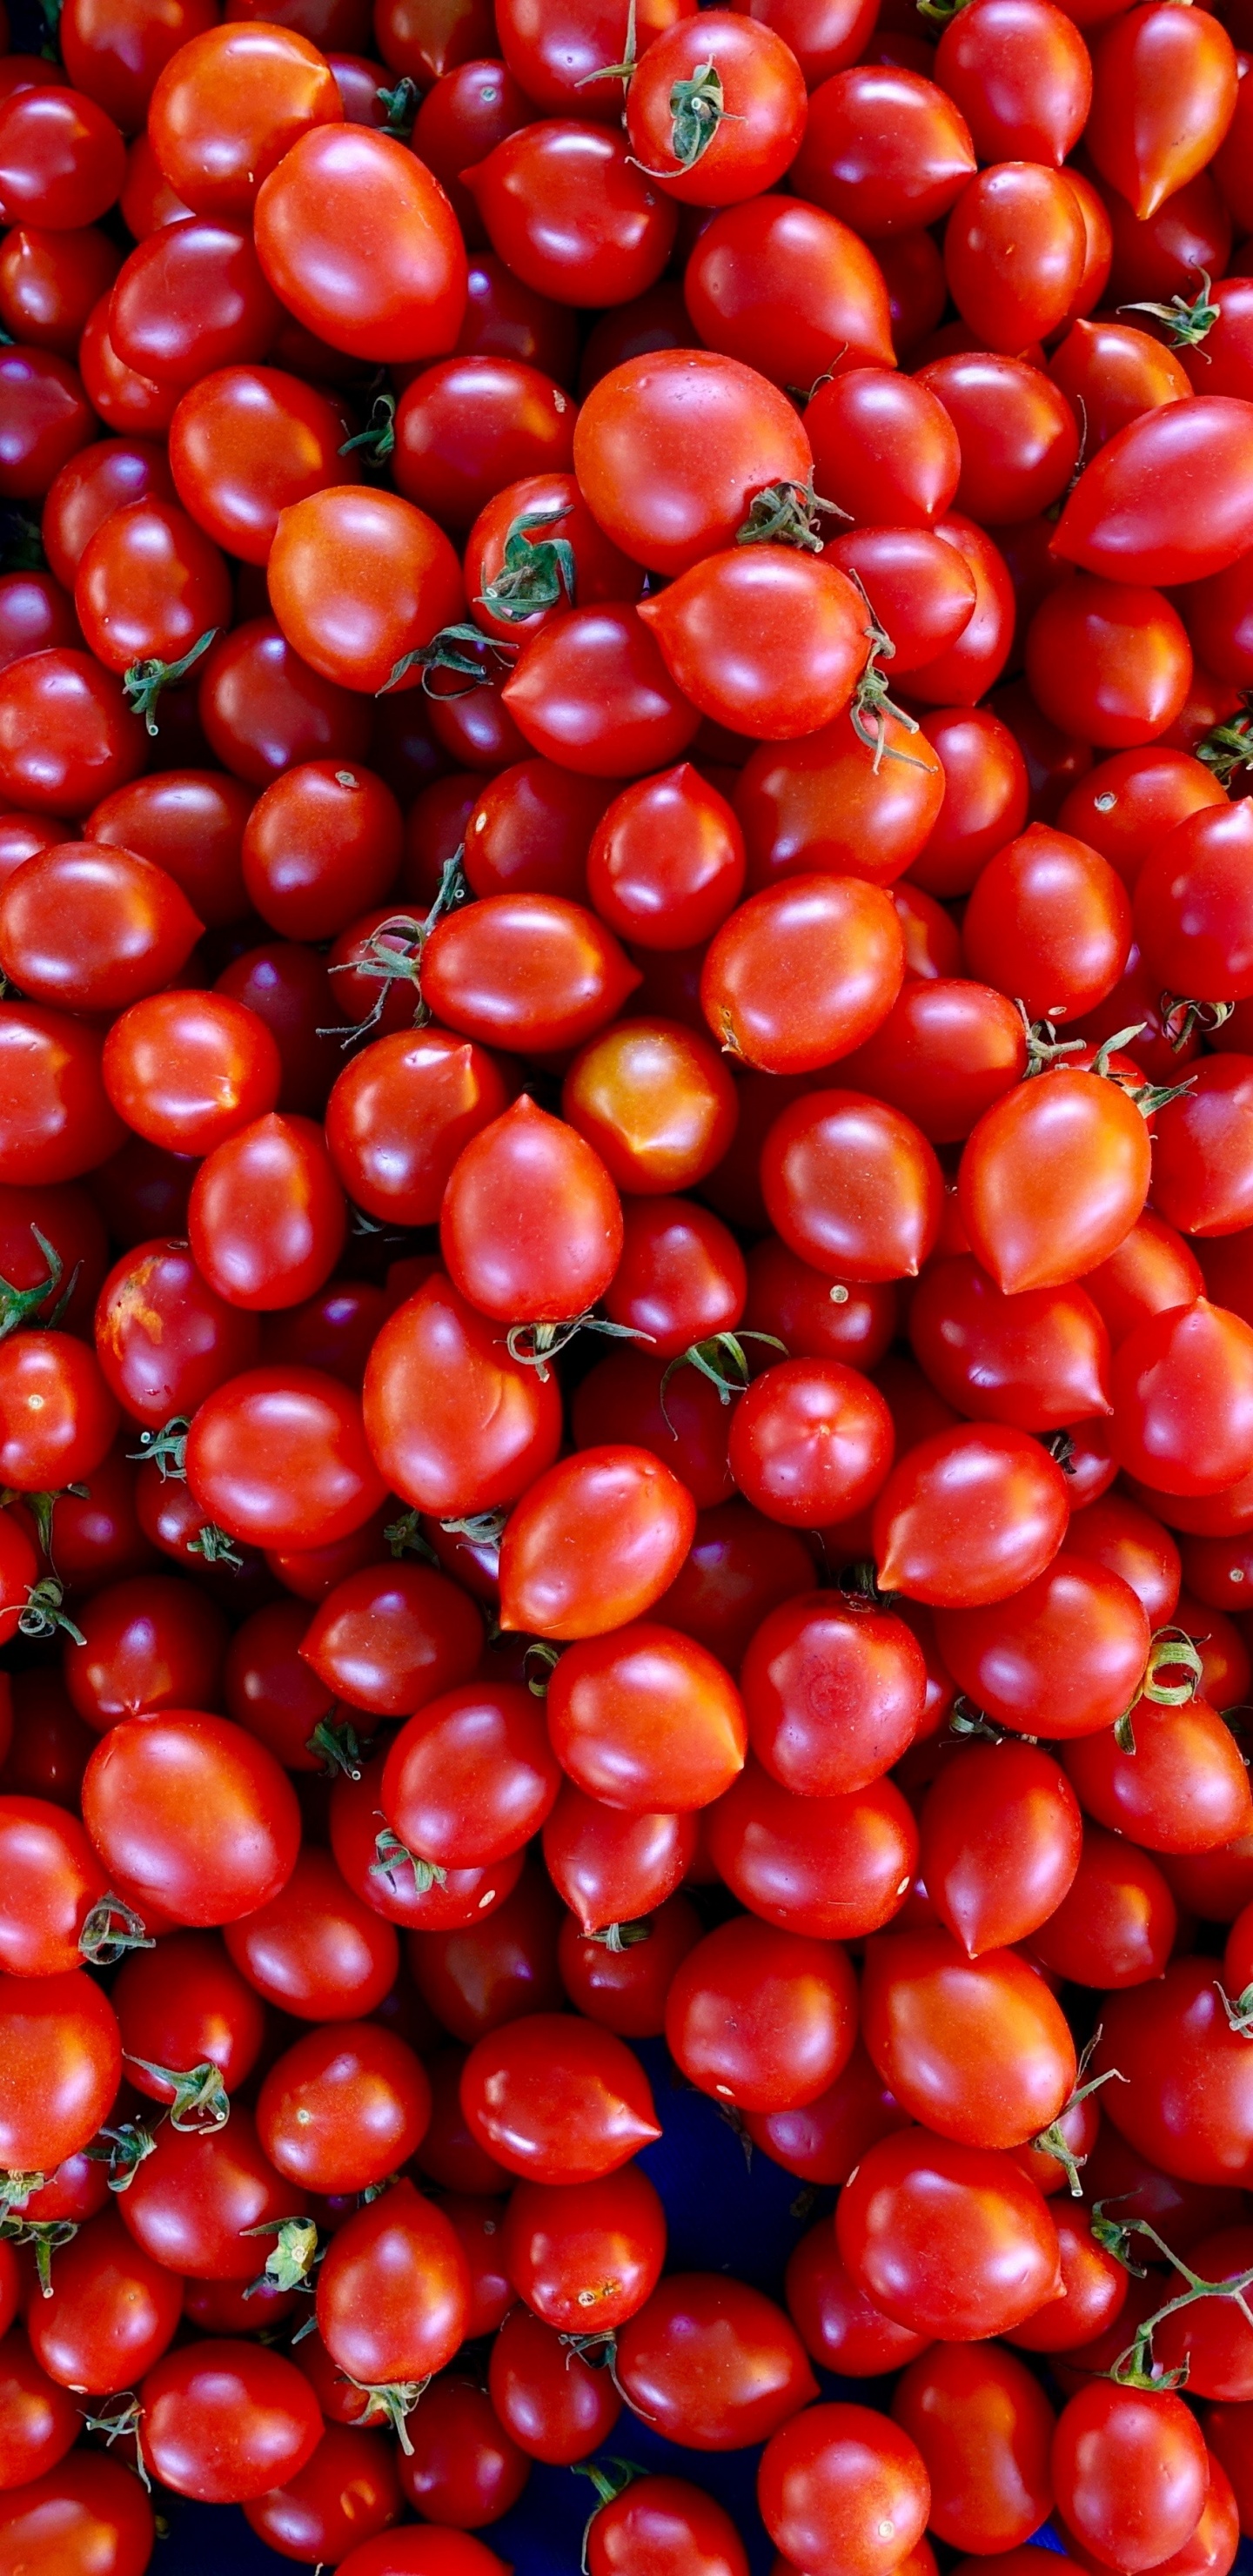 Red Round Fruits on Blue Plastic Container. Wallpaper in 1440x2960 Resolution